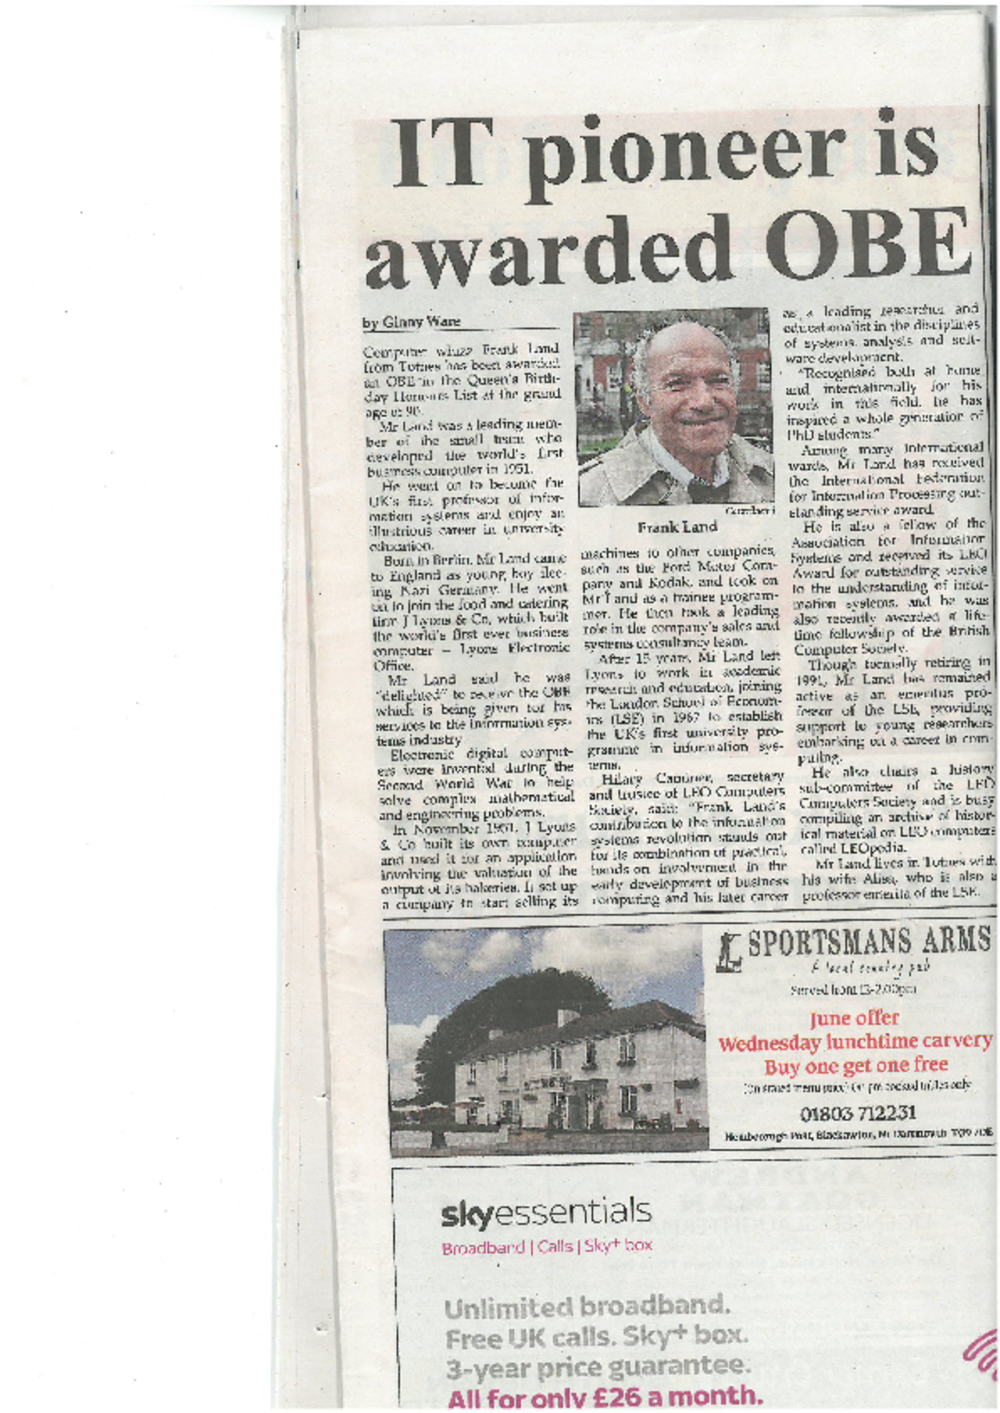 Article: IT pioneer is awarded OBE